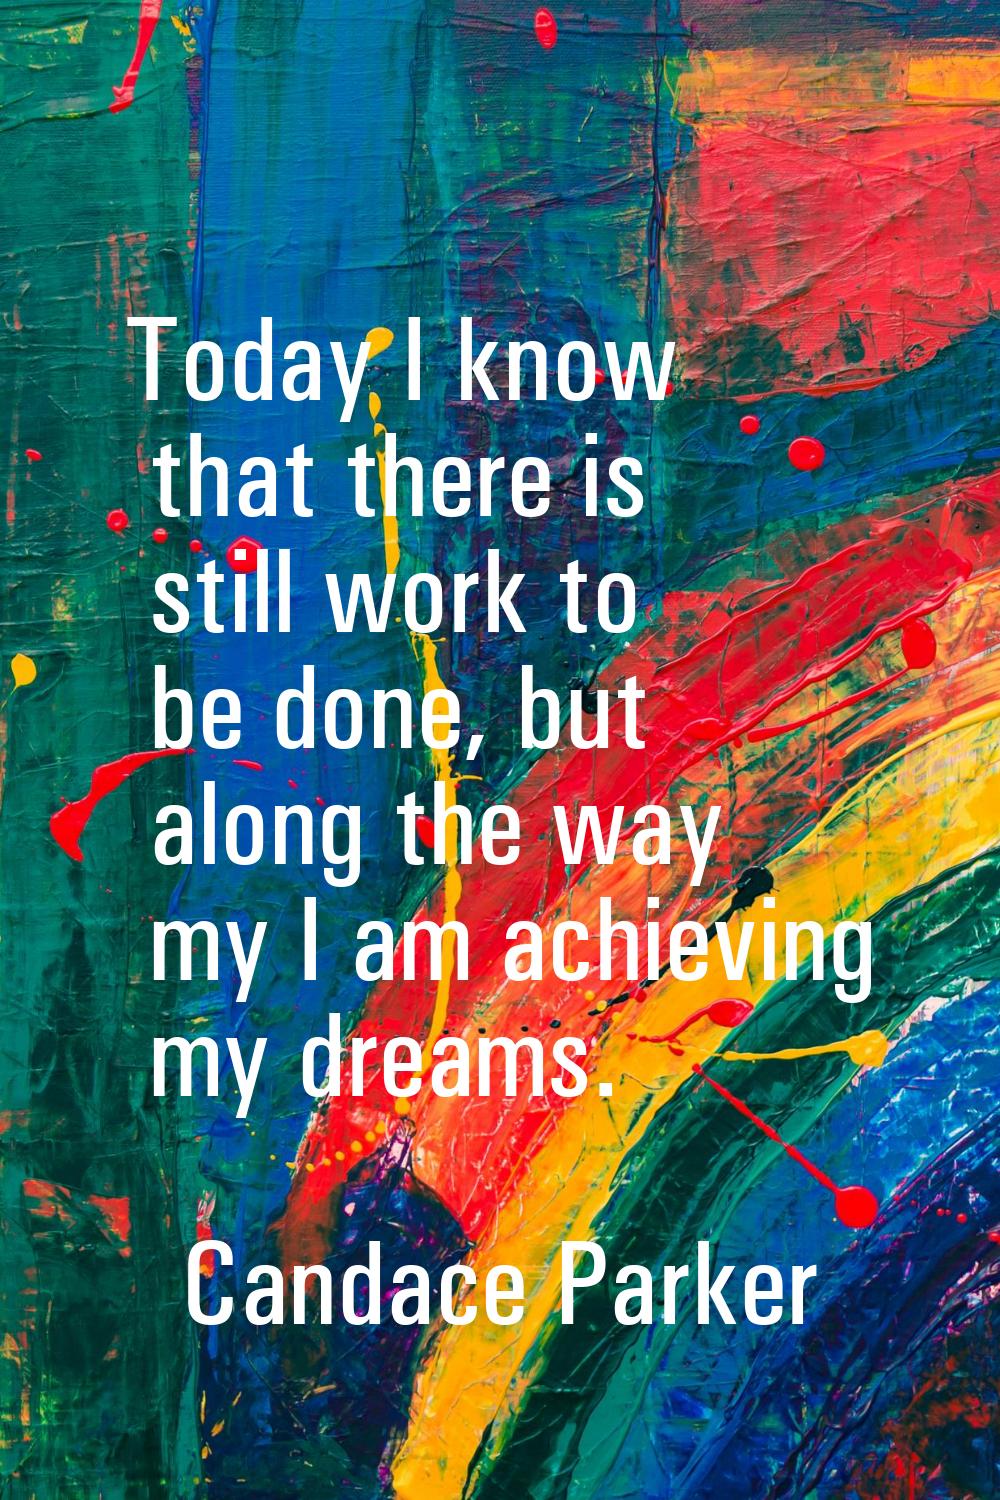 Today I know that there is still work to be done, but along the way my I am achieving my dreams.